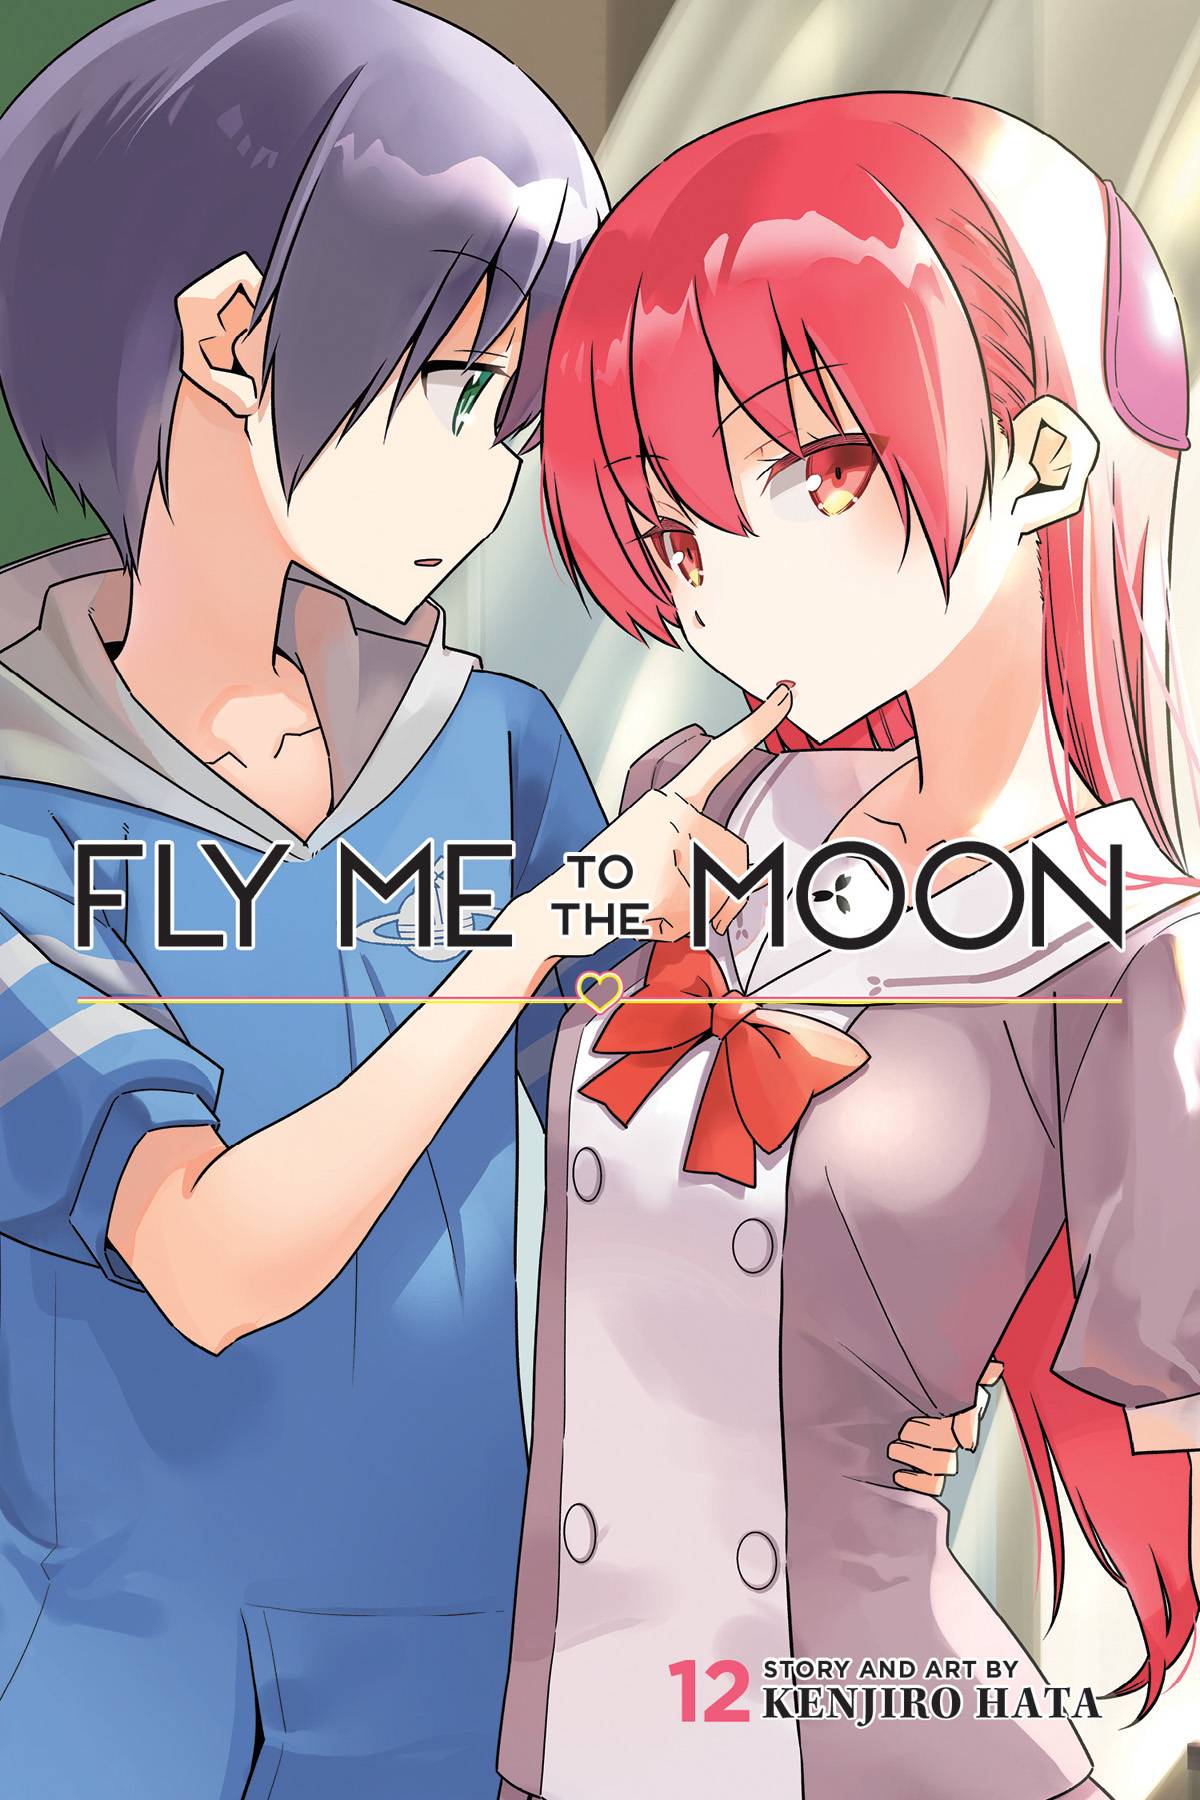 FLY ME TO THE MOON GN VOL 12